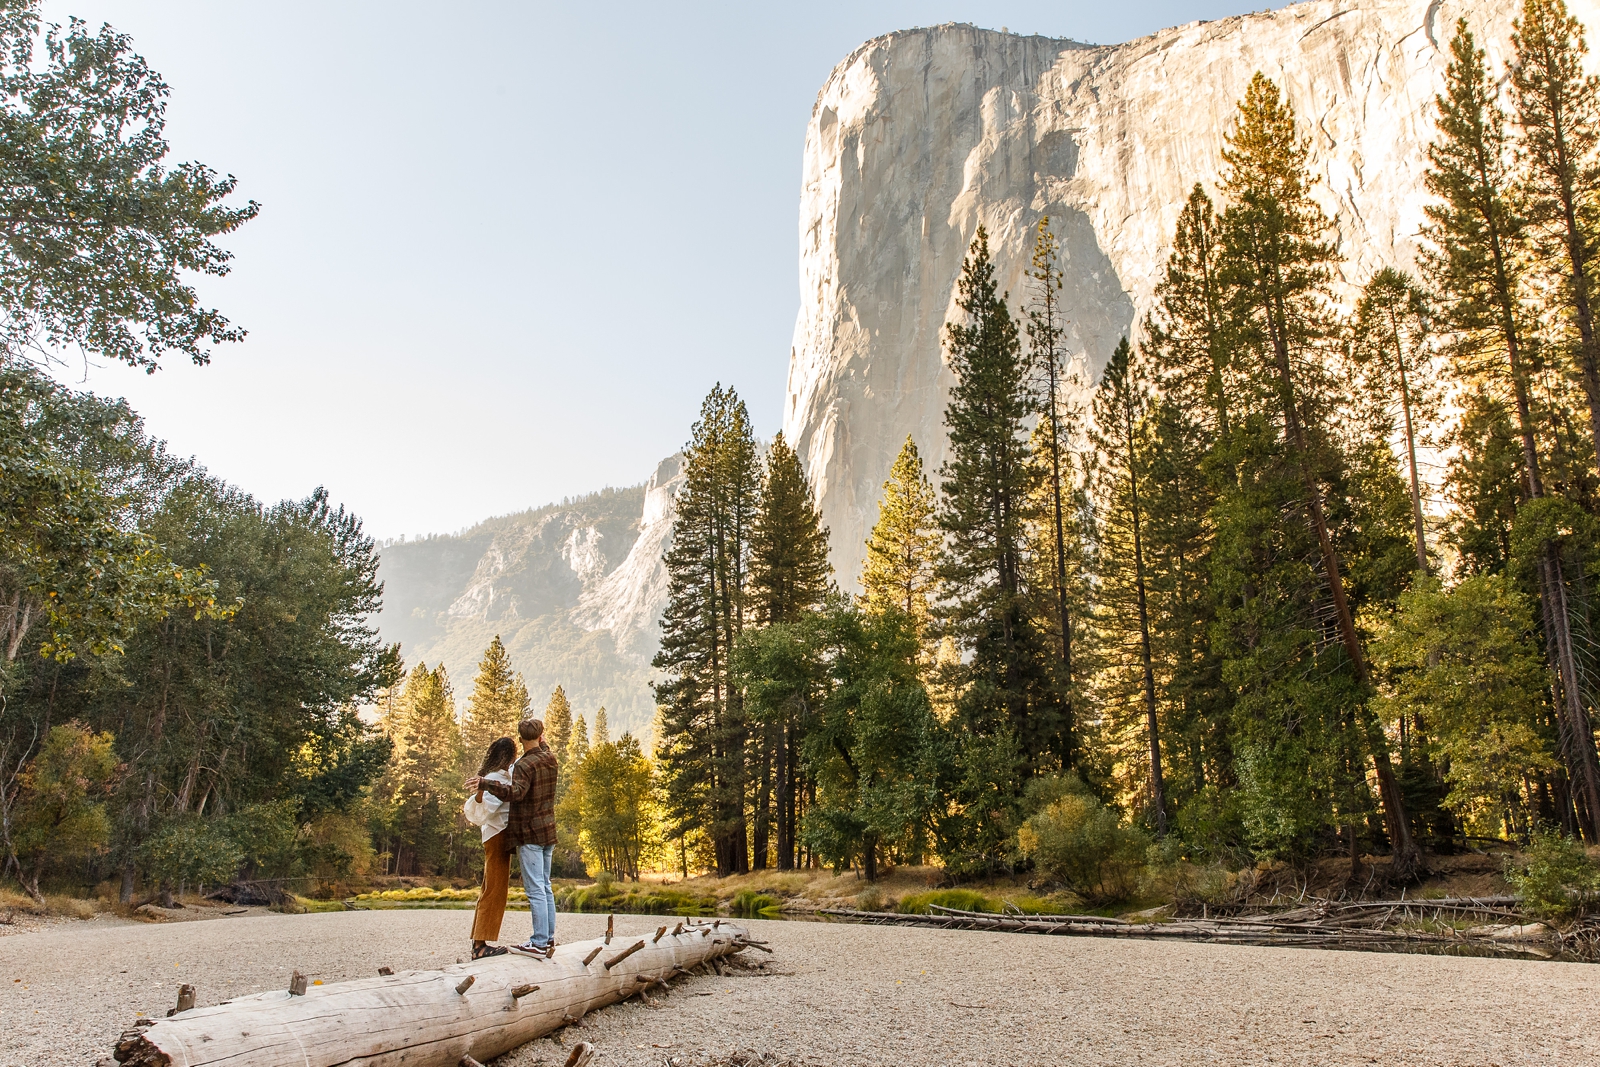 This couple explored Cathedral Beach in Yosemite